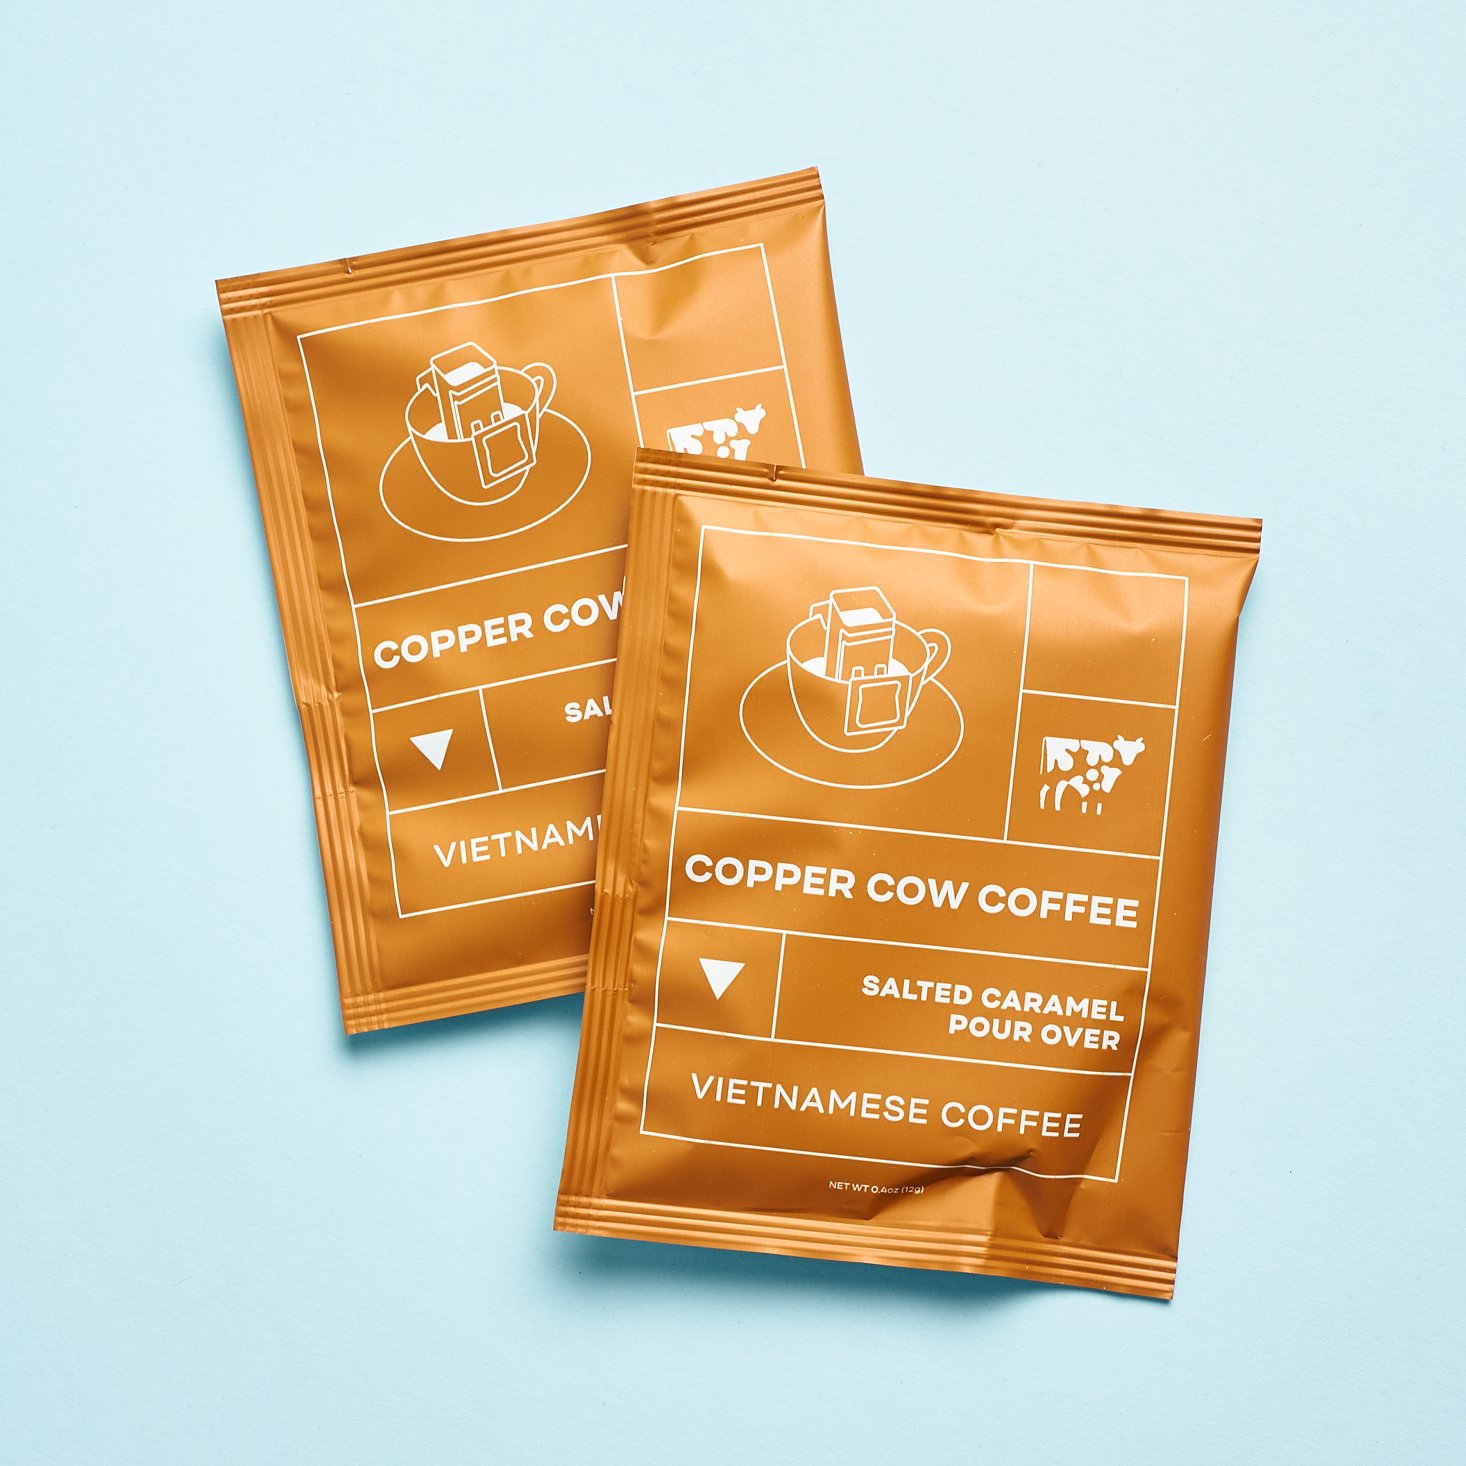 copper cow coffee review